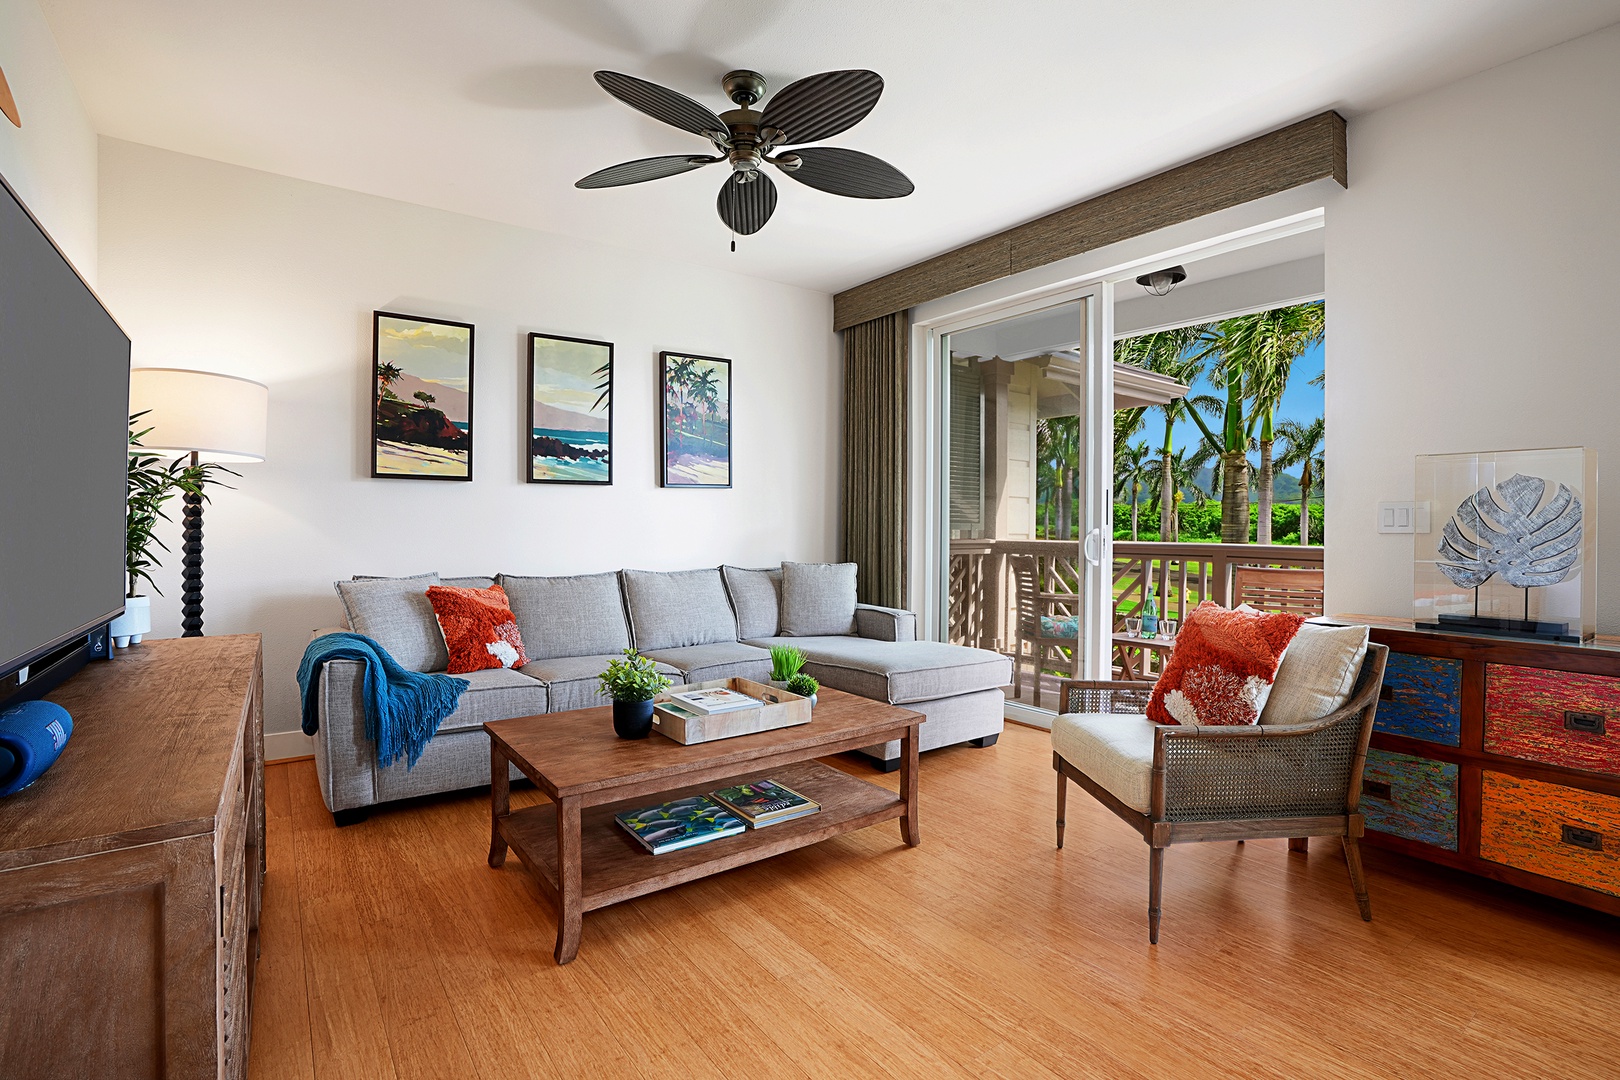 Koloa Vacation Rentals, Pili Mai 15G - A two-story, second-floor unit, Pili Mai 15G provides the ideal location for a honeymoon, anniversary trip, family getaway, or couples' escape to paradise